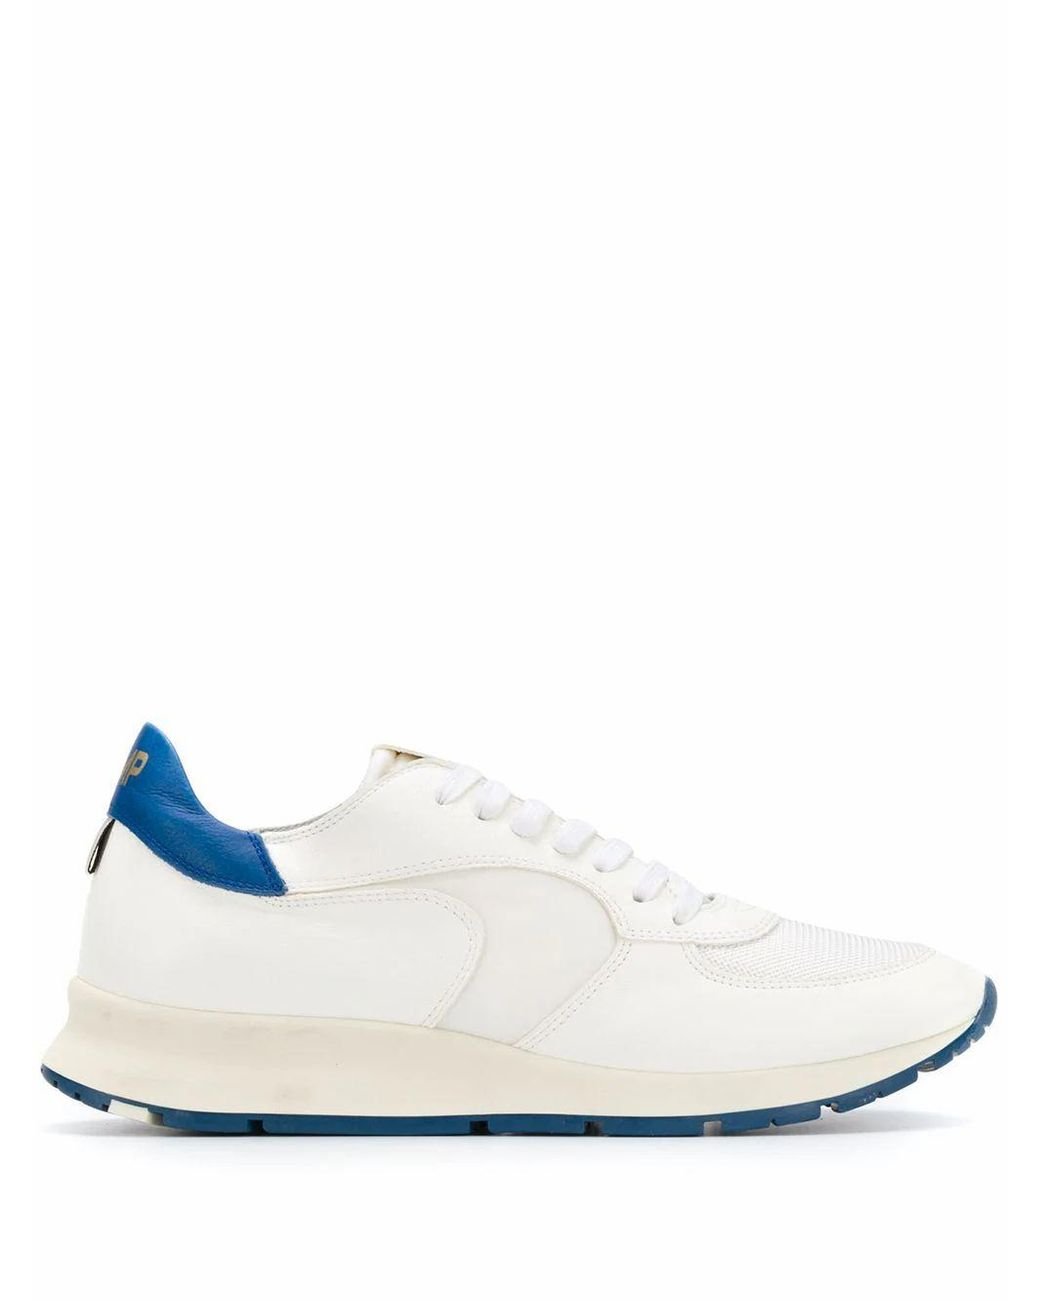 Philippe Model Leather Sneakers in White for Men - Lyst